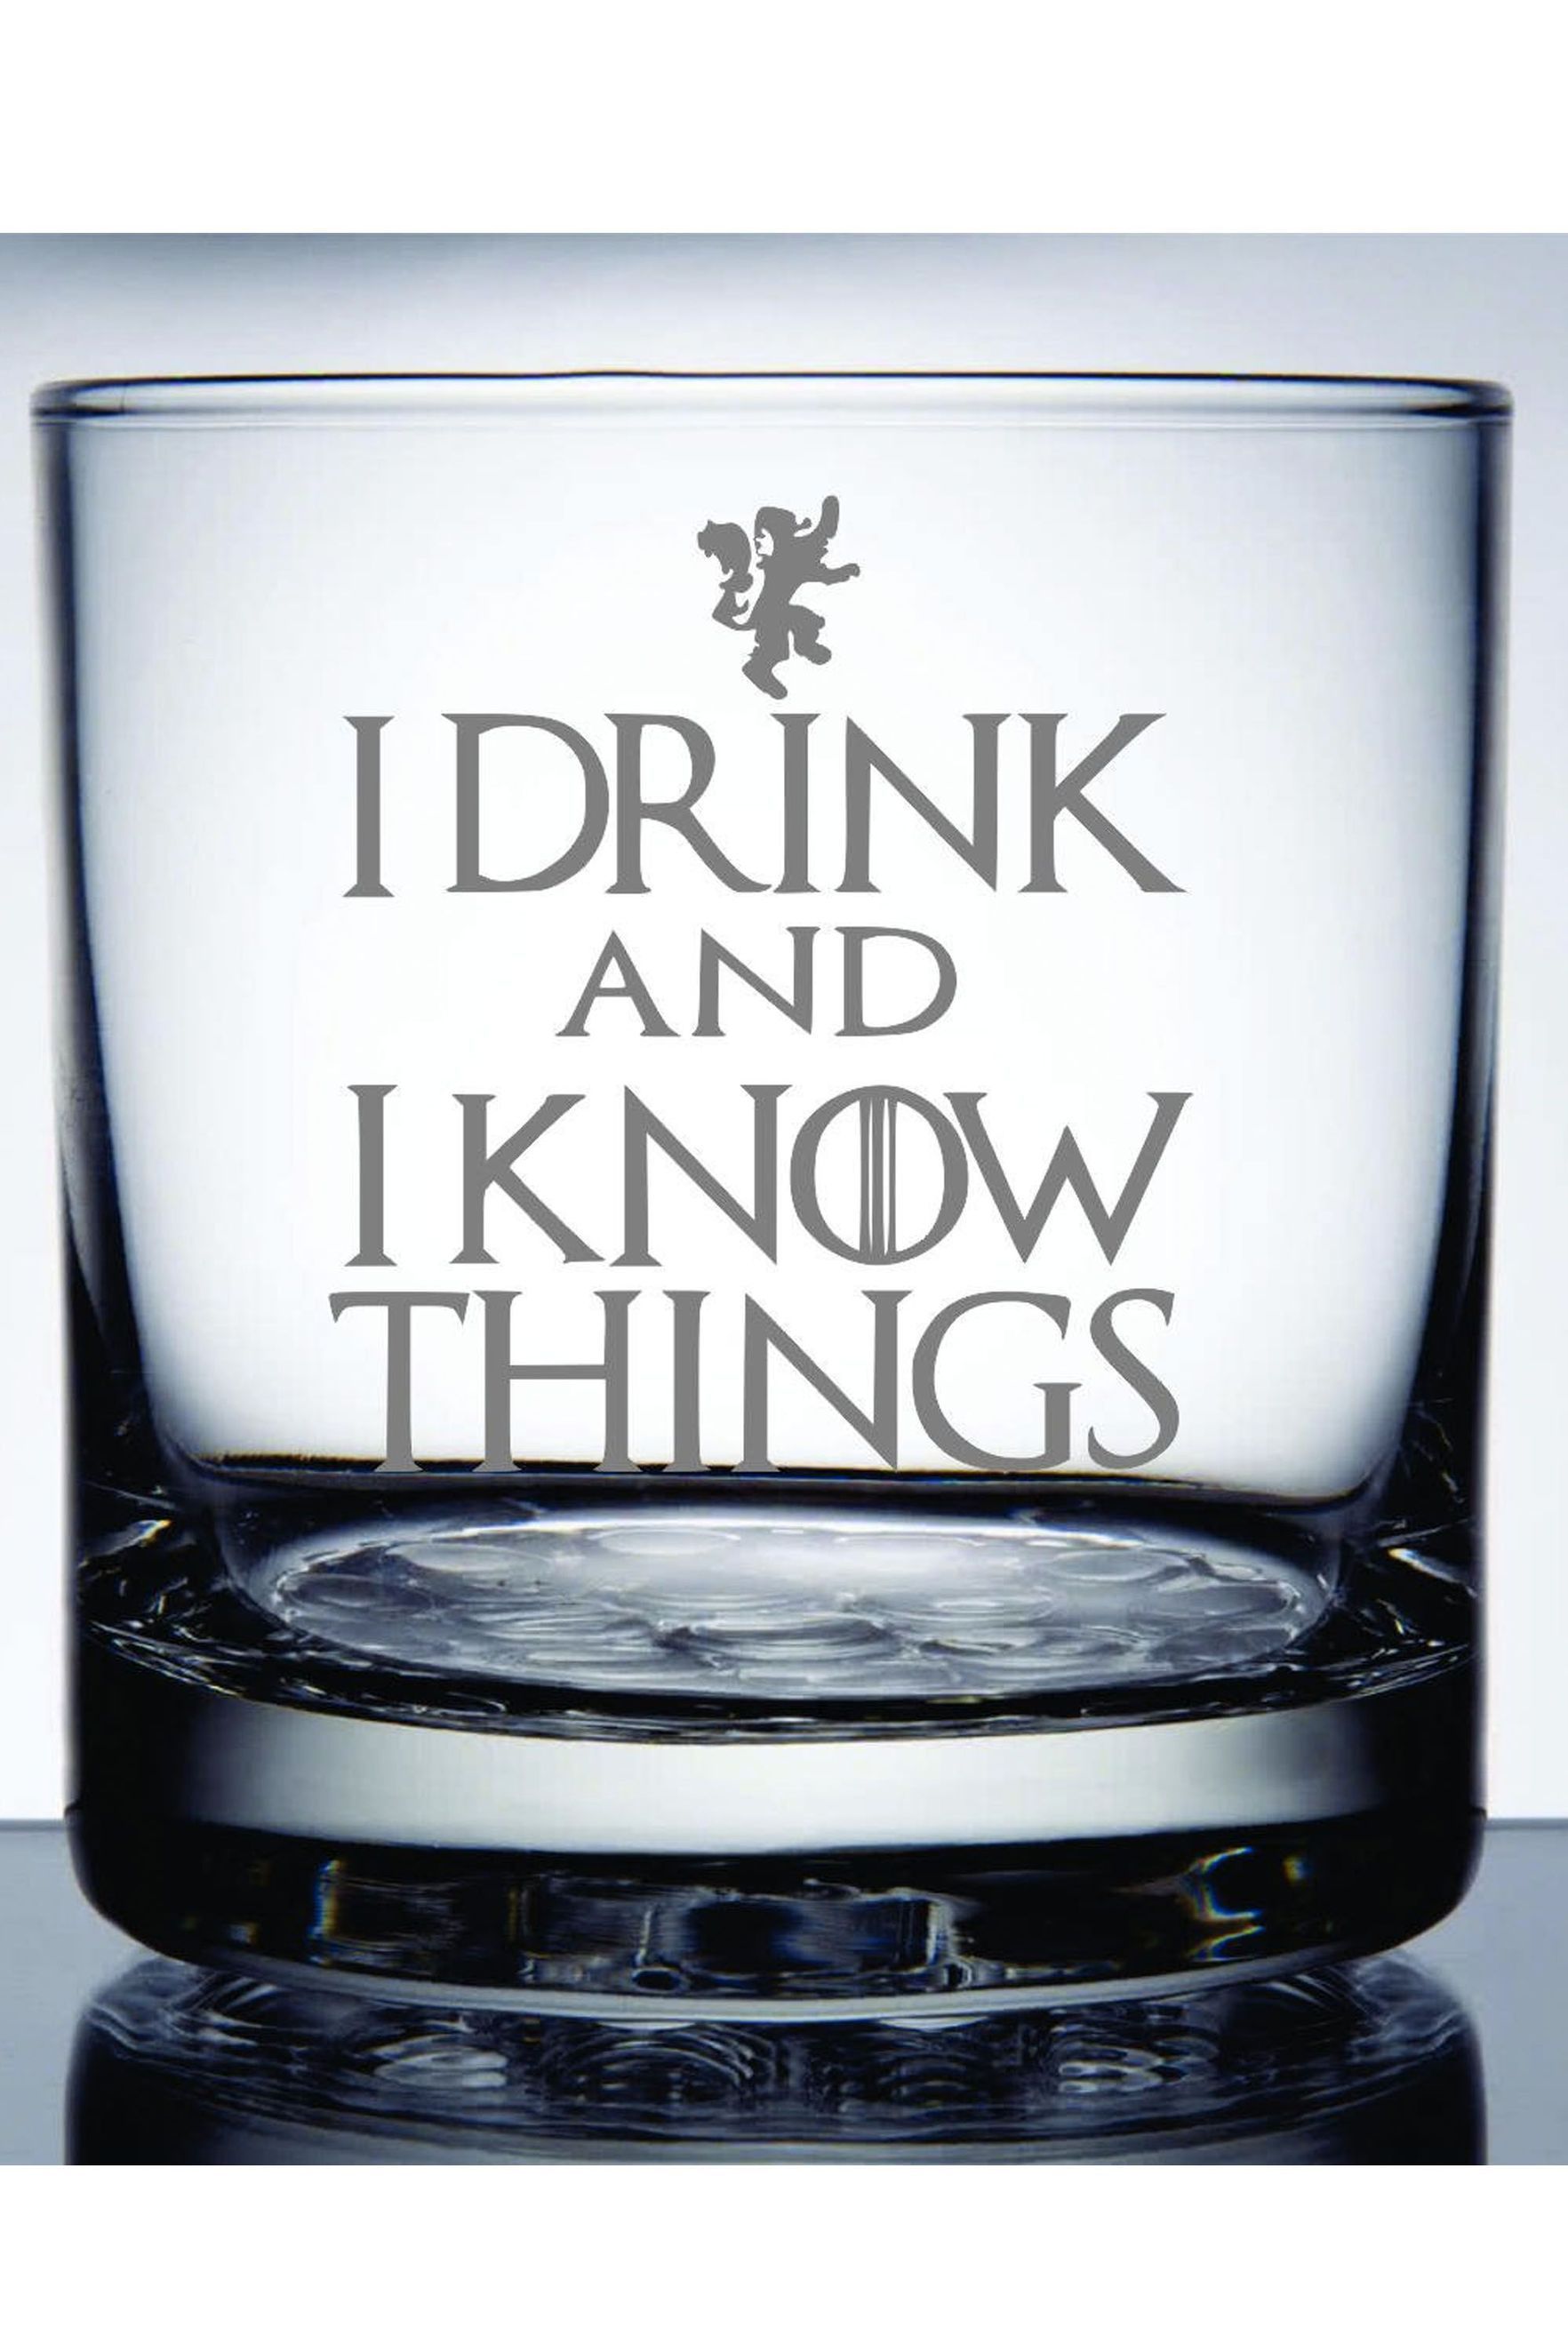 I Drink & I Know Things -   19 diy projects For Him life
 ideas